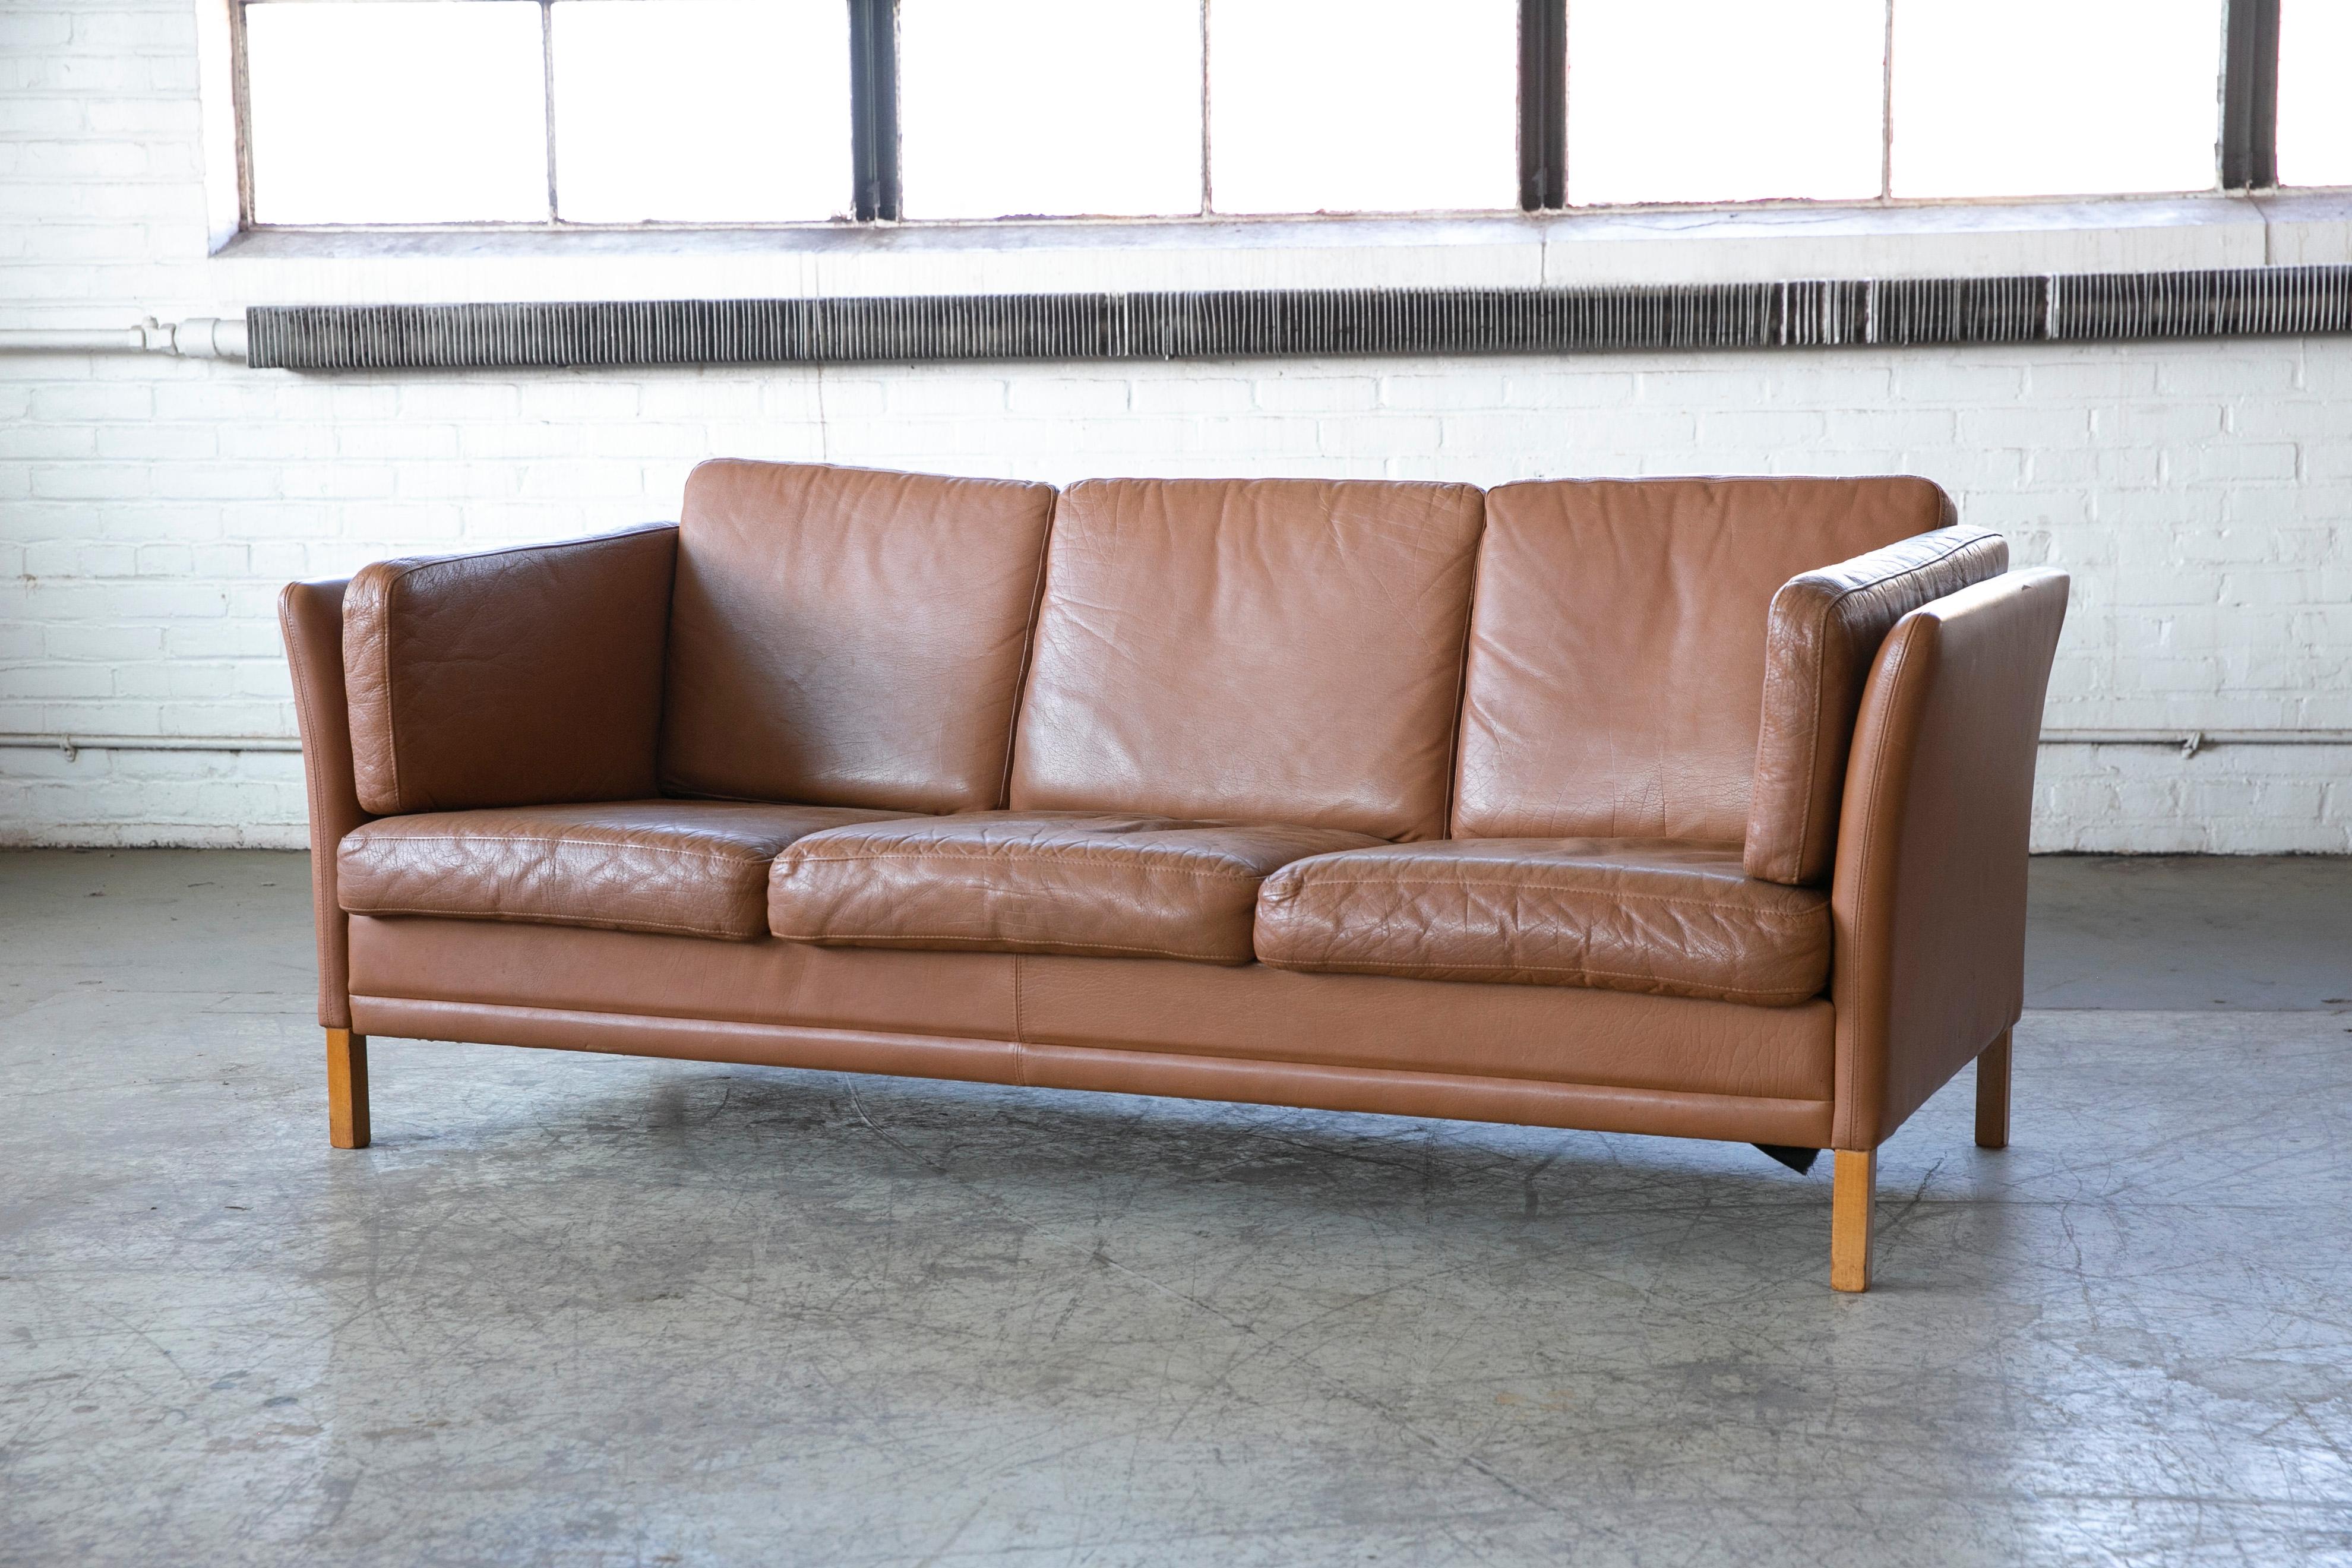 Classic Danish midcentury three-seat leather sofa in a nice warm chestnut color designed by Mogens Hansen - designed in the early 1970s and manufactured by Mogens Hansen's factory in Denmark. Very elegant with the slightly splayed sides and